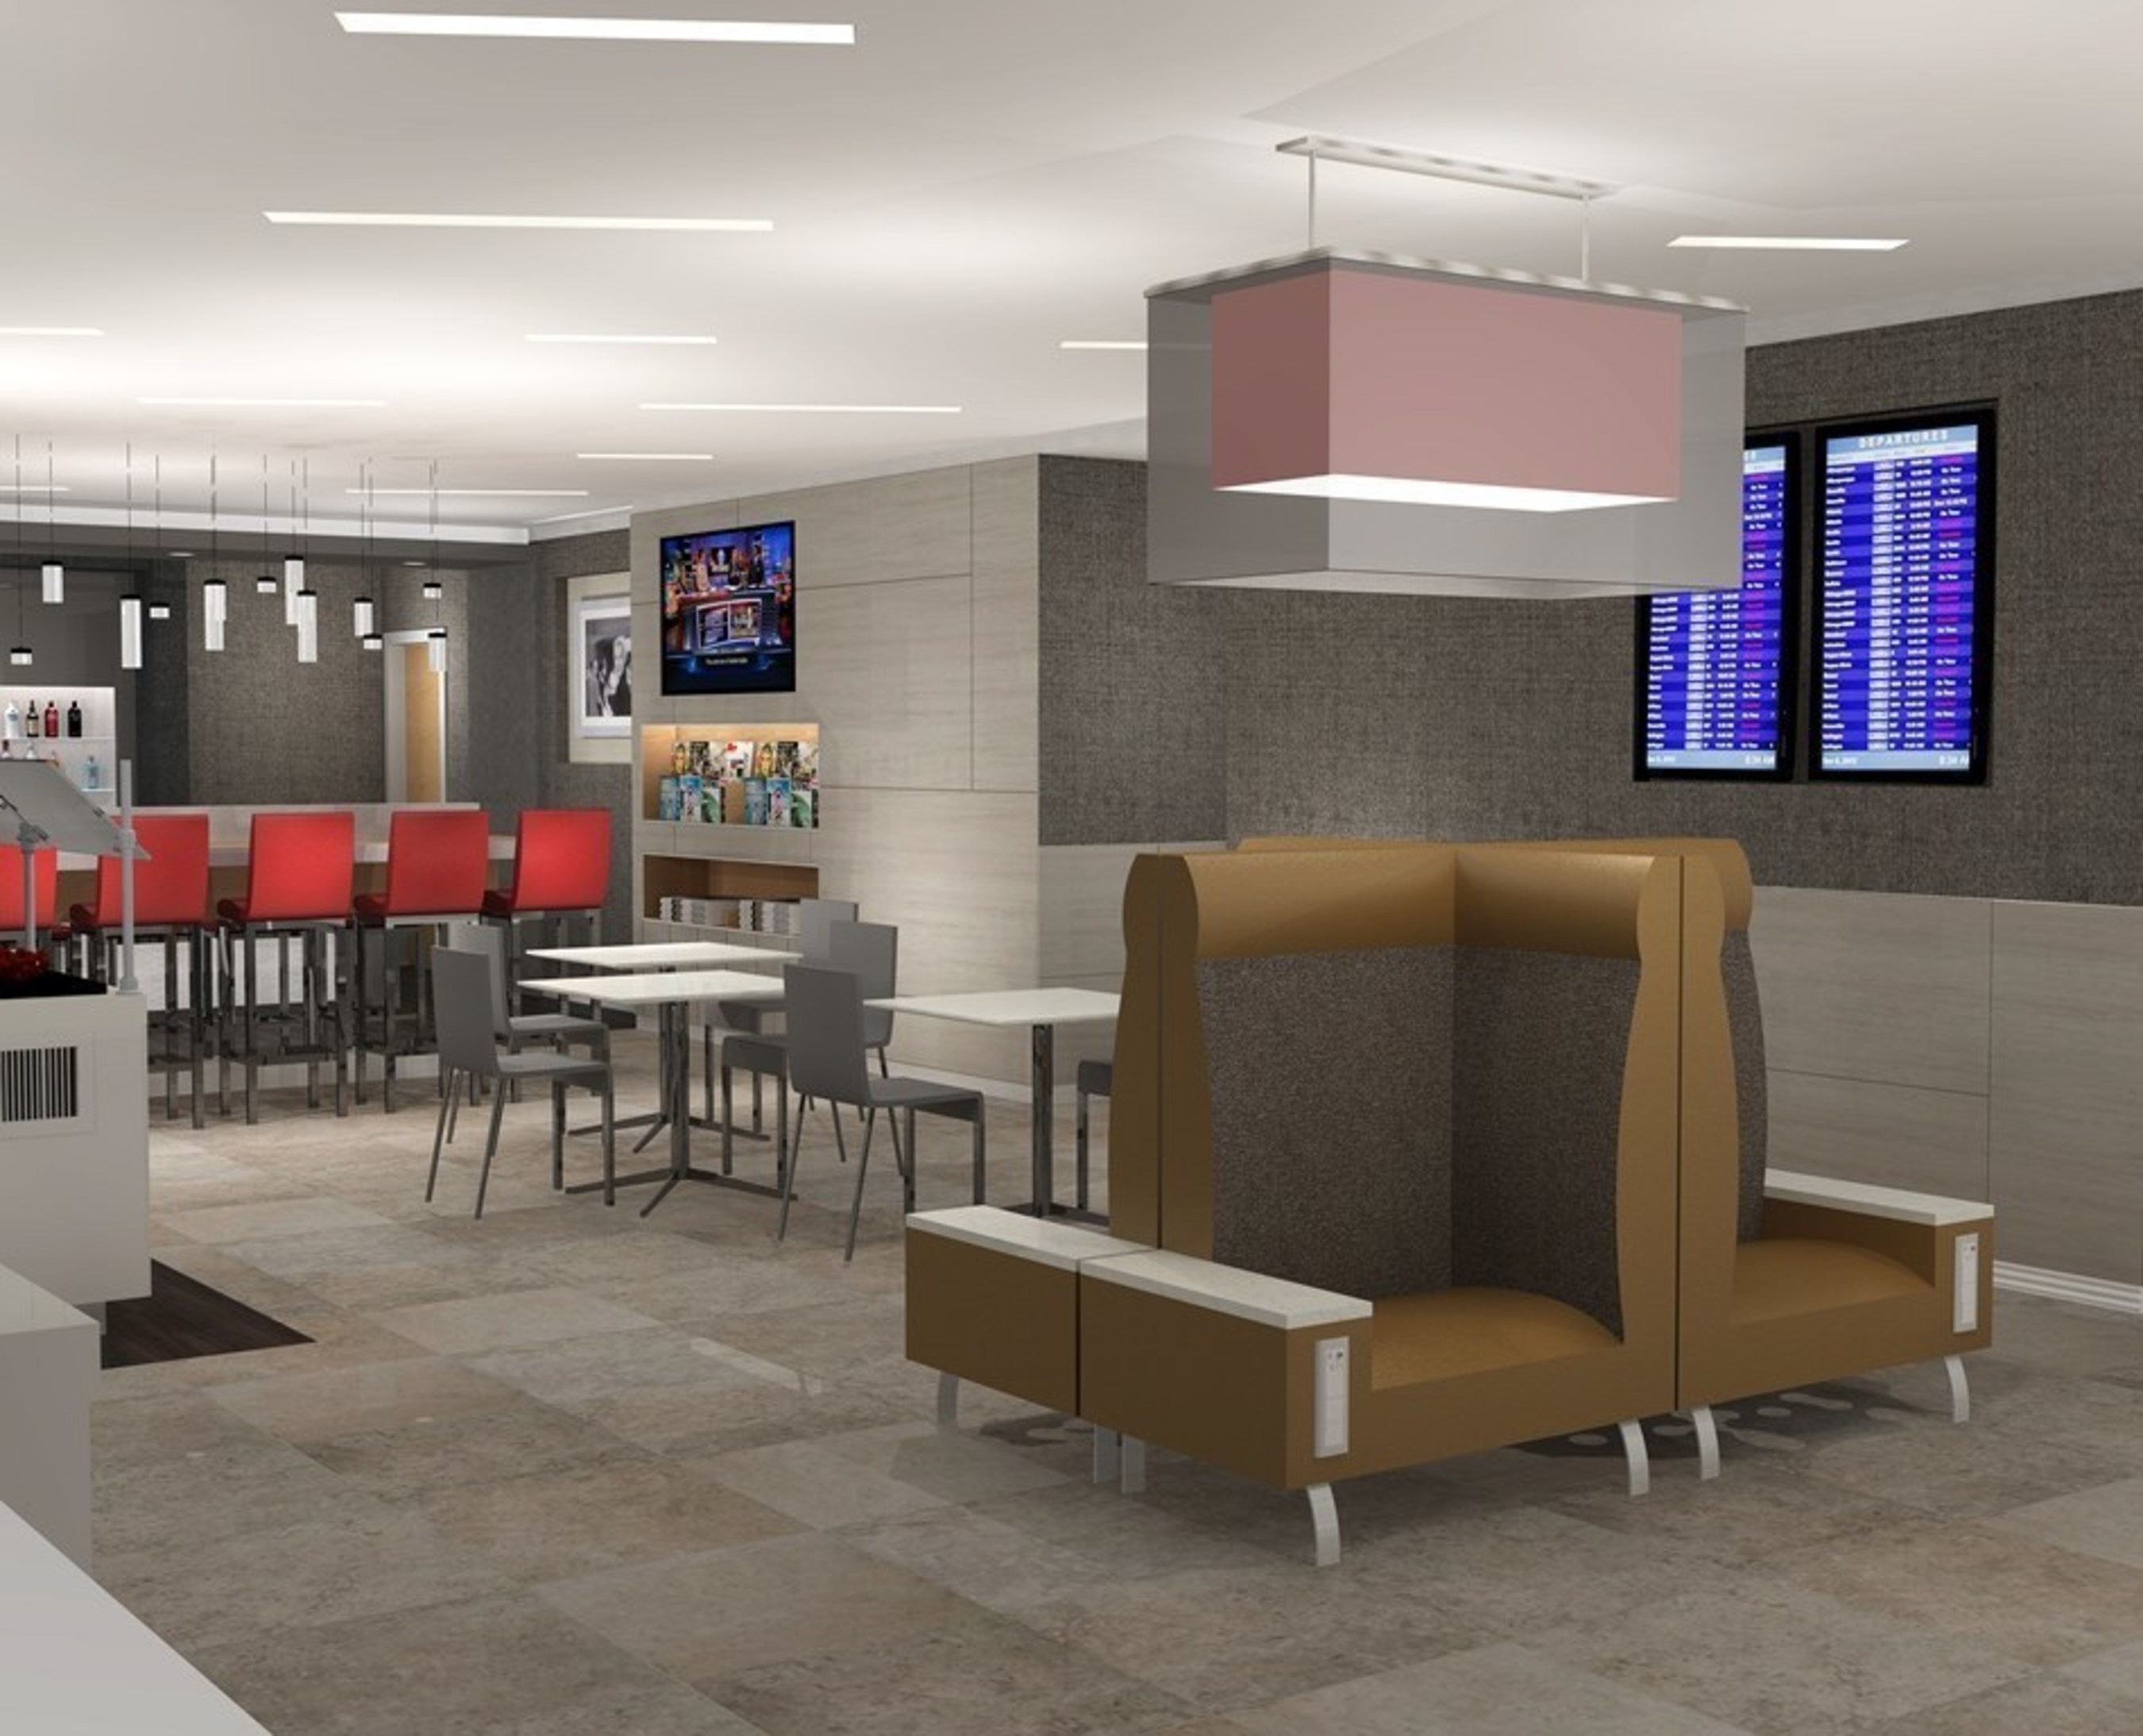 Rendering shows the future look of the Admirals Club in PHX Terminal A.